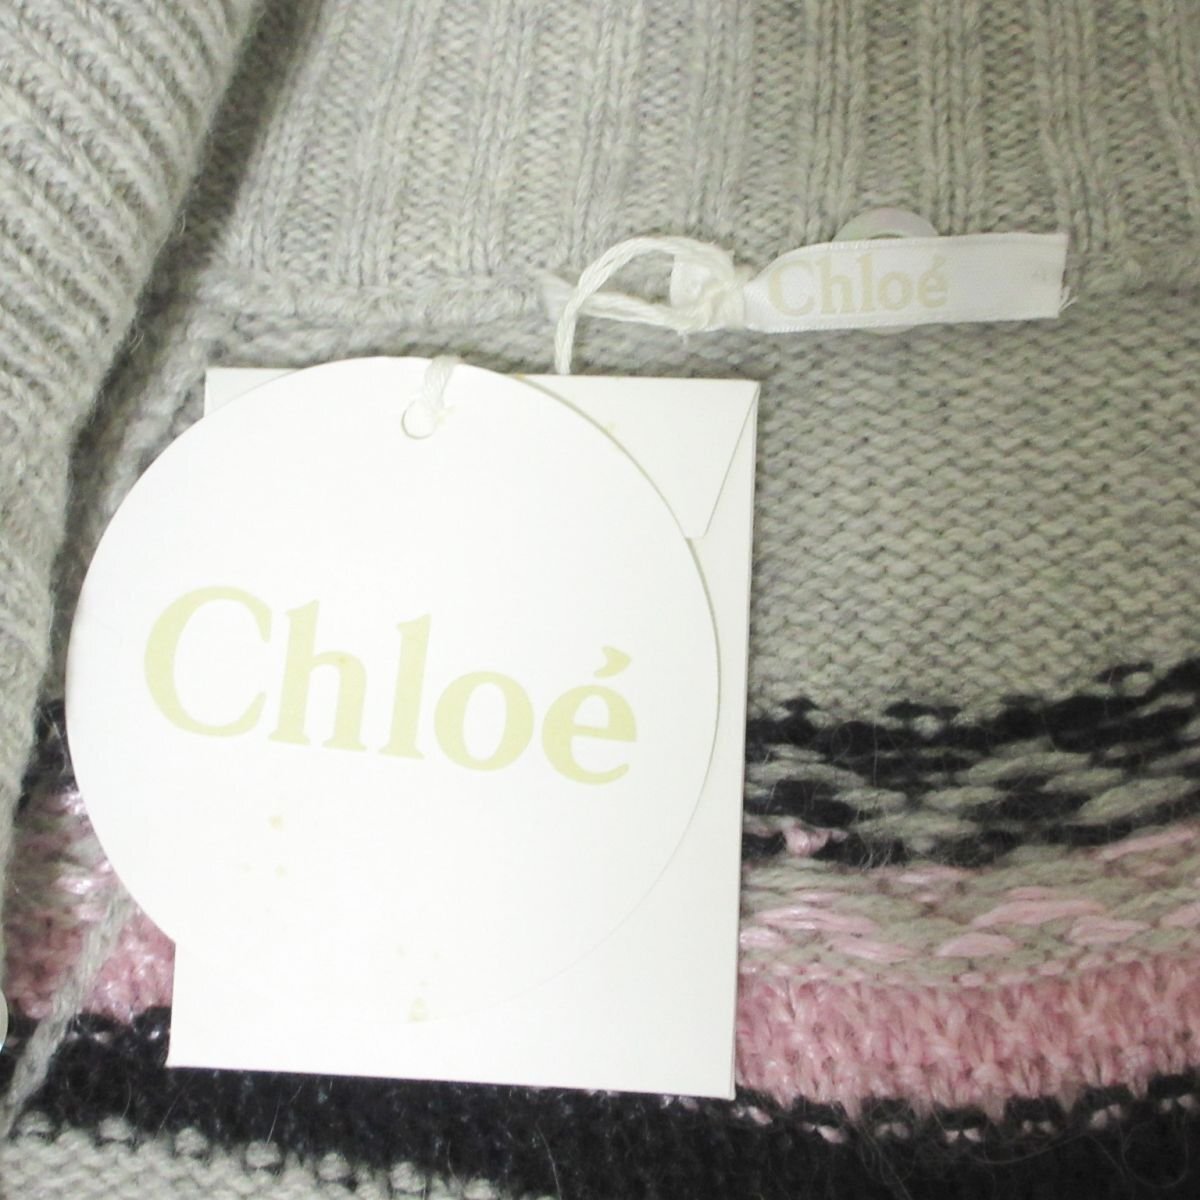  unused Chloe Chloe border pattern Anne gola× cashmere Blend long height knitted cardigan XS gray 044 *